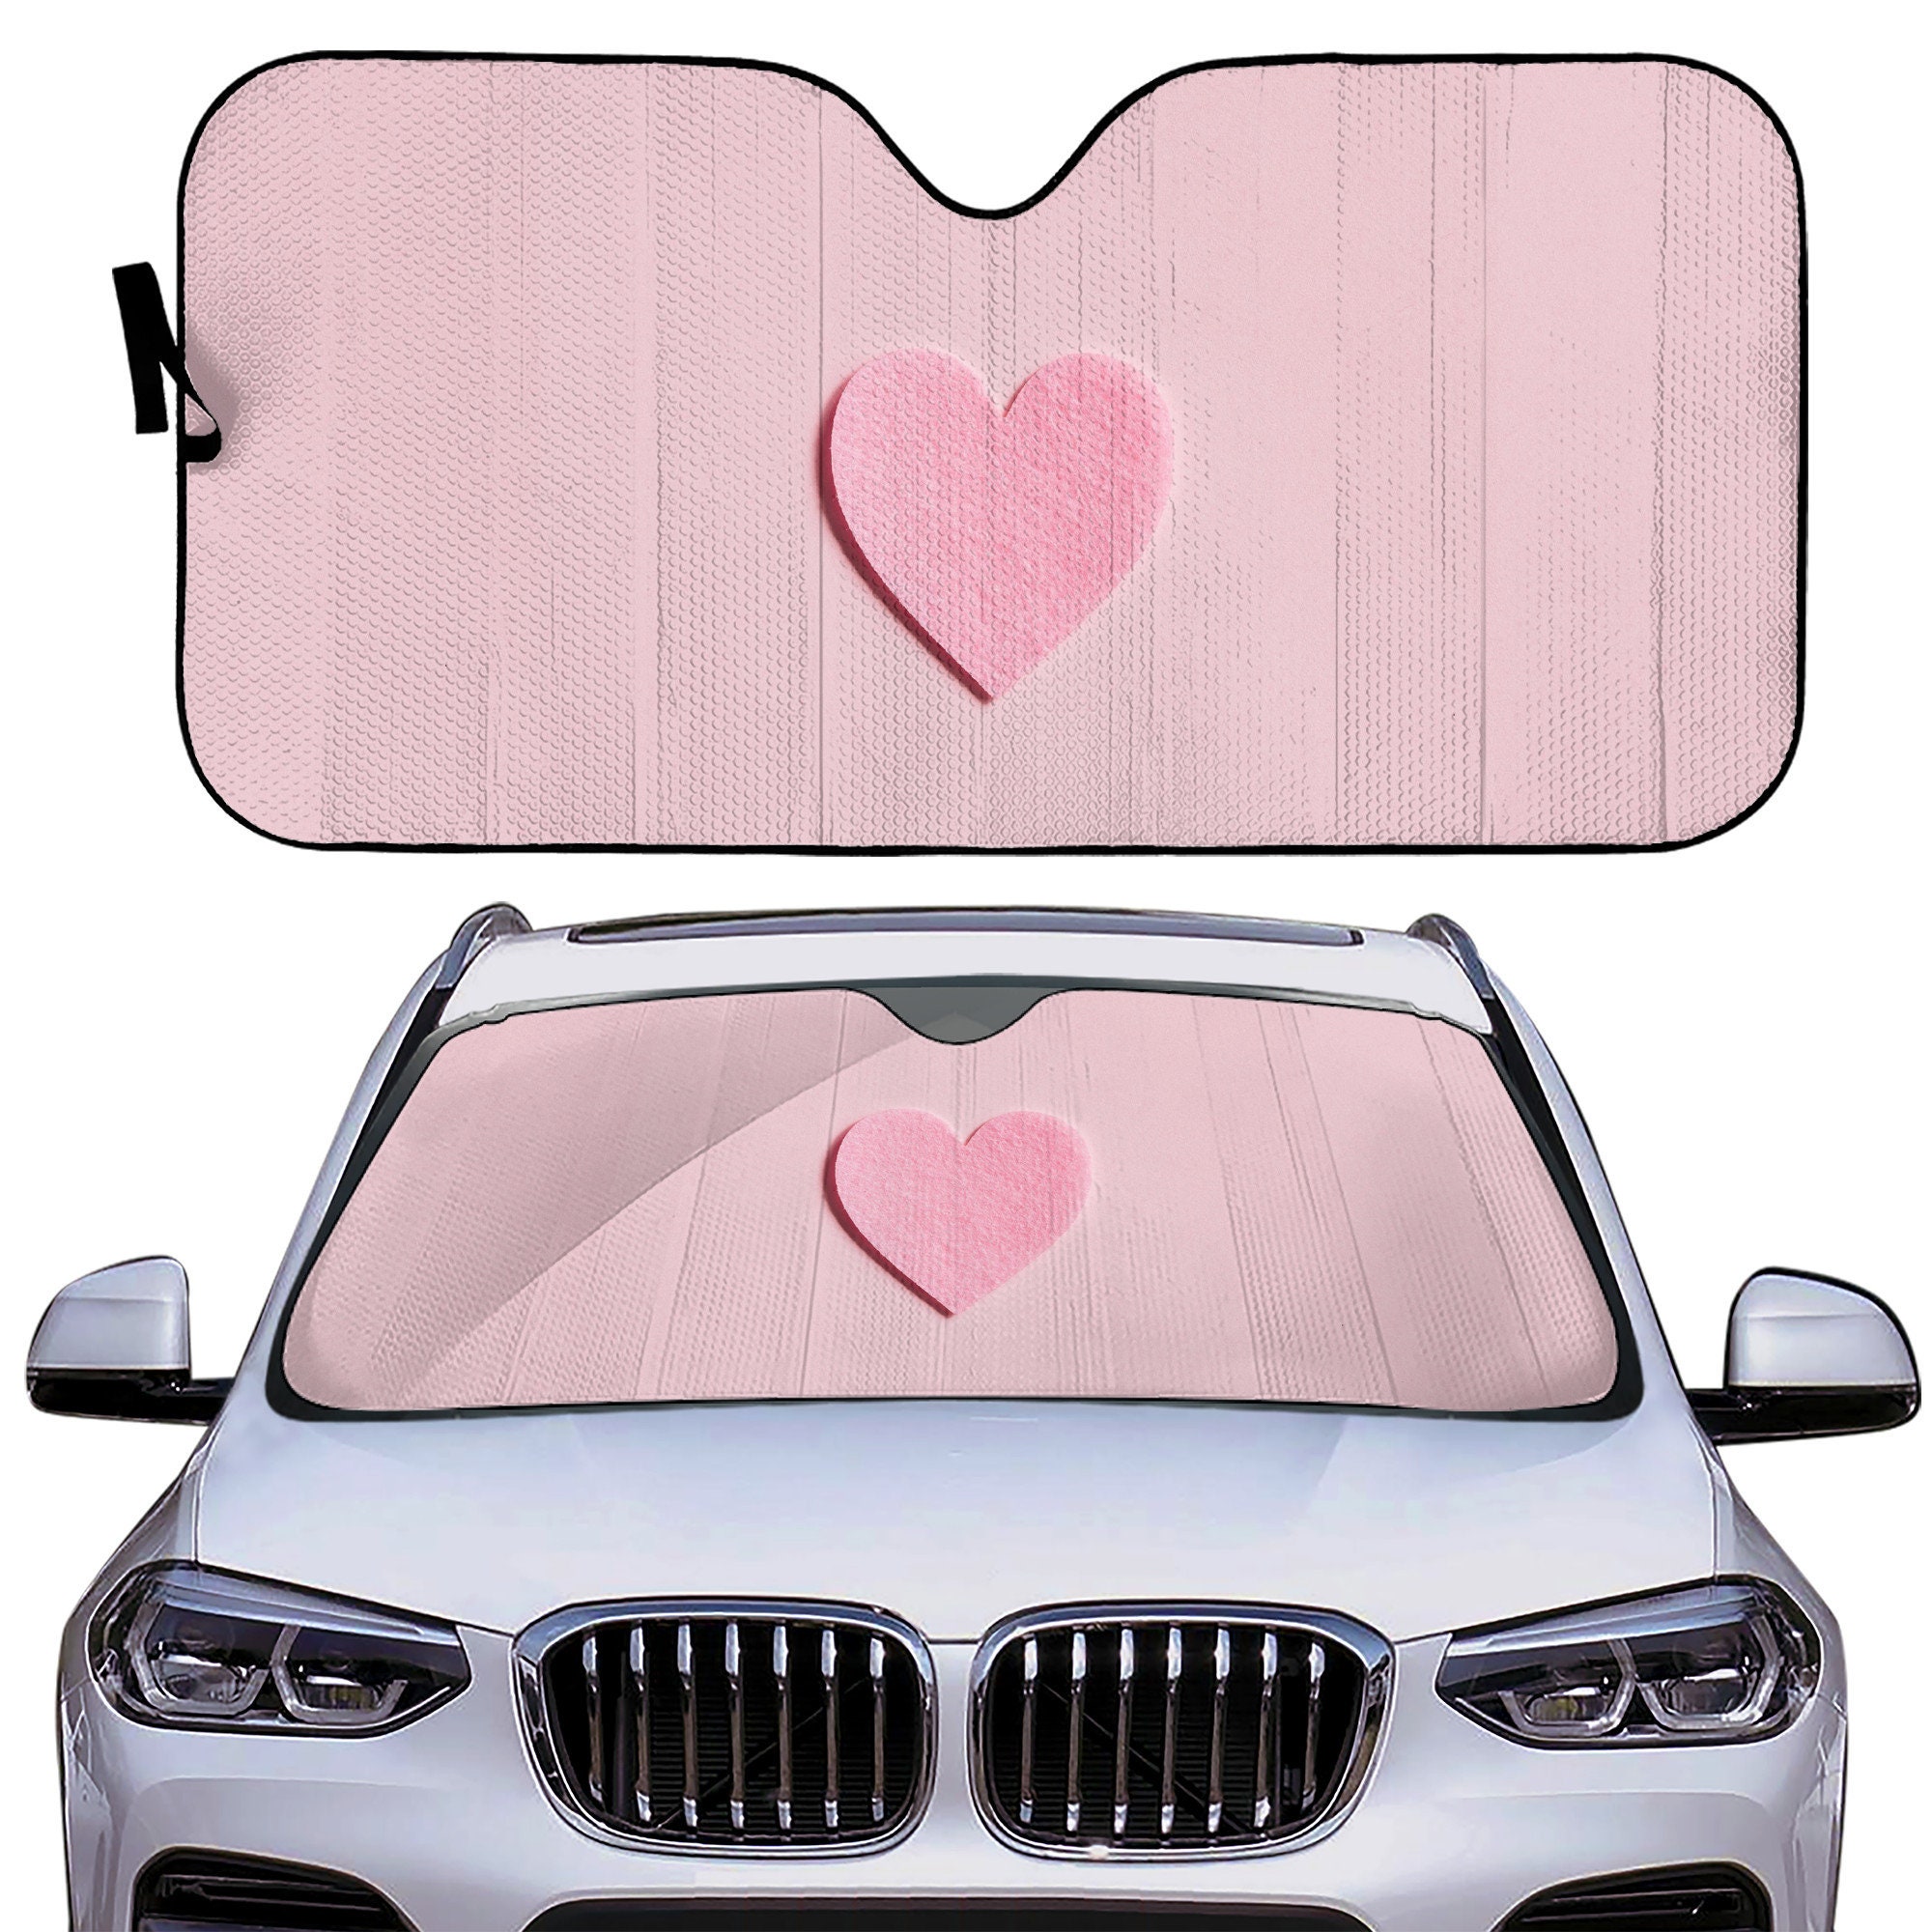 Keep Your Car Cool with the Cute Hamster Print Car Sunshade – A Stylish Sun  Visor for Optimal Sun Protection and Interior Car Accessories